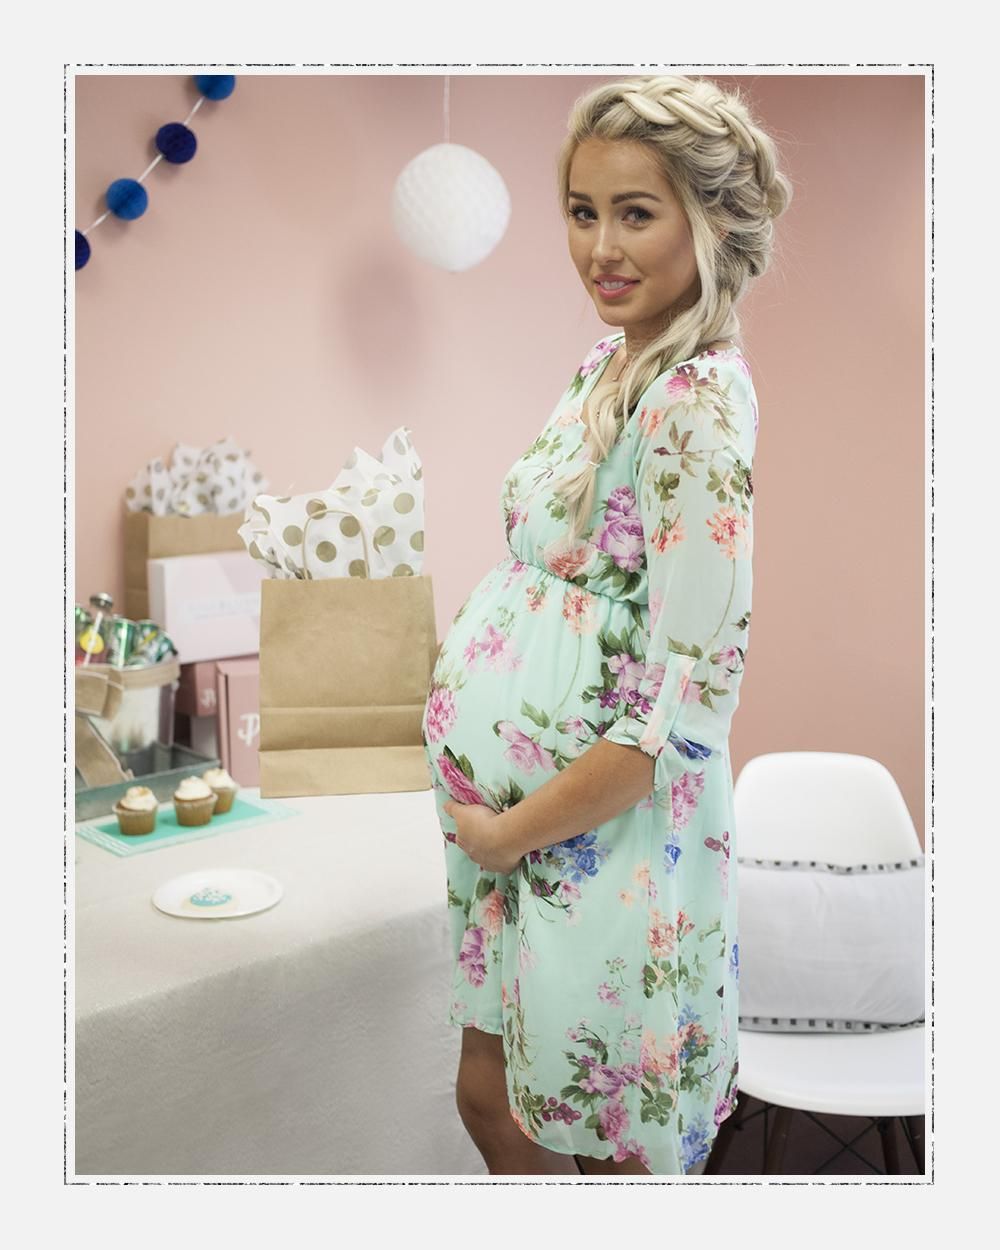 Full Size of Baby Shower:maternity Boutique Cute Maternity Dresses For Baby Shower Affordable Maternity Dresses For Baby Shower What To Wear To My Baby Shower Maternity Gown Style Maternity Stores Near Me Plus Size Maternity Clothes Cheap Maternity Jeans